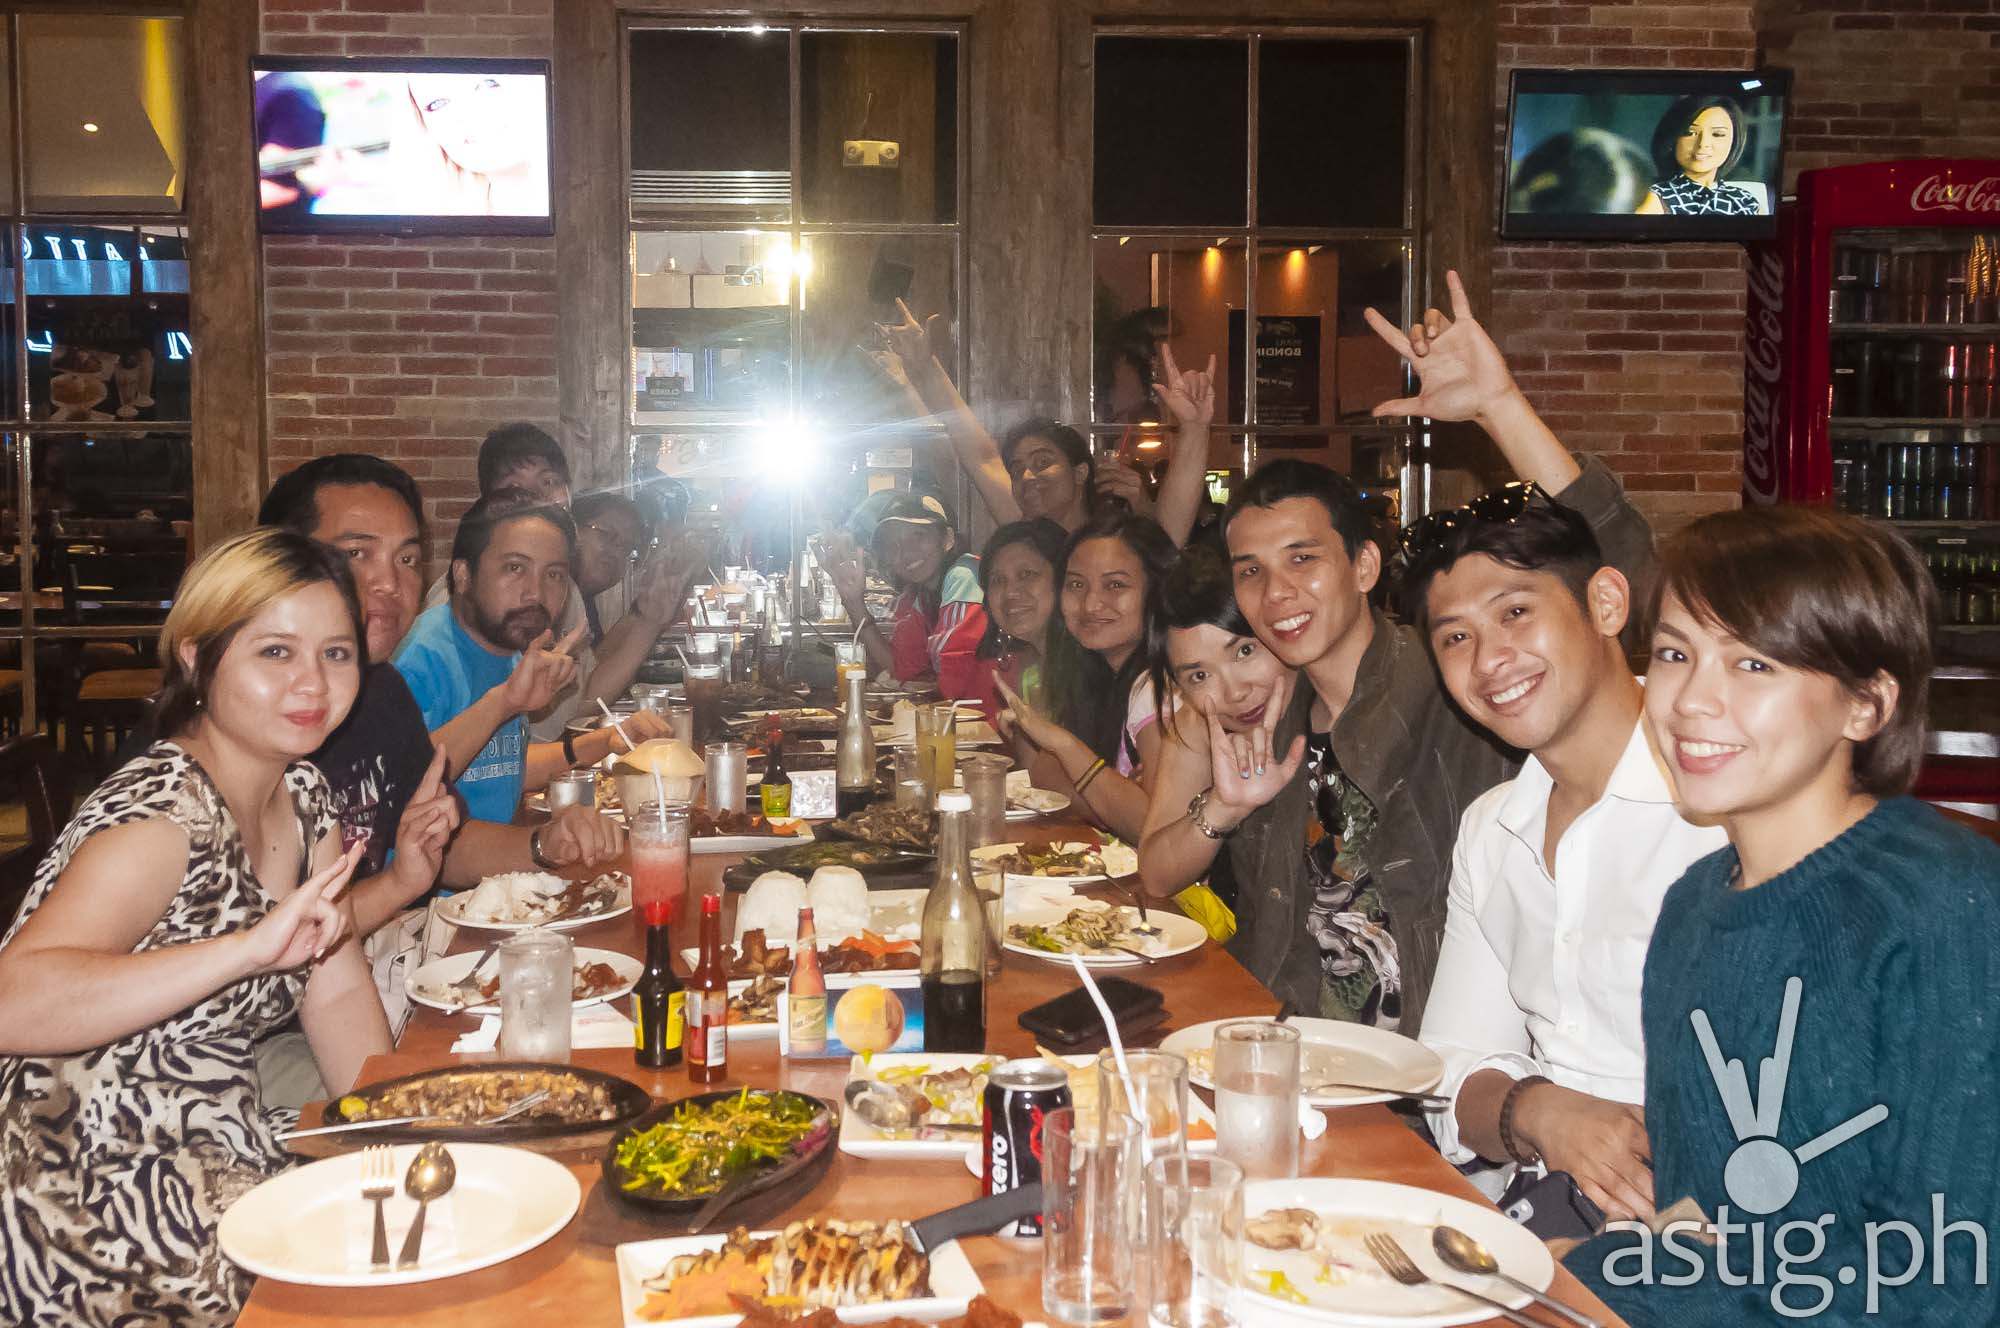 ASTIG.PH celebrates a successful year at Gerry's Grill in Promenade, Greenhills